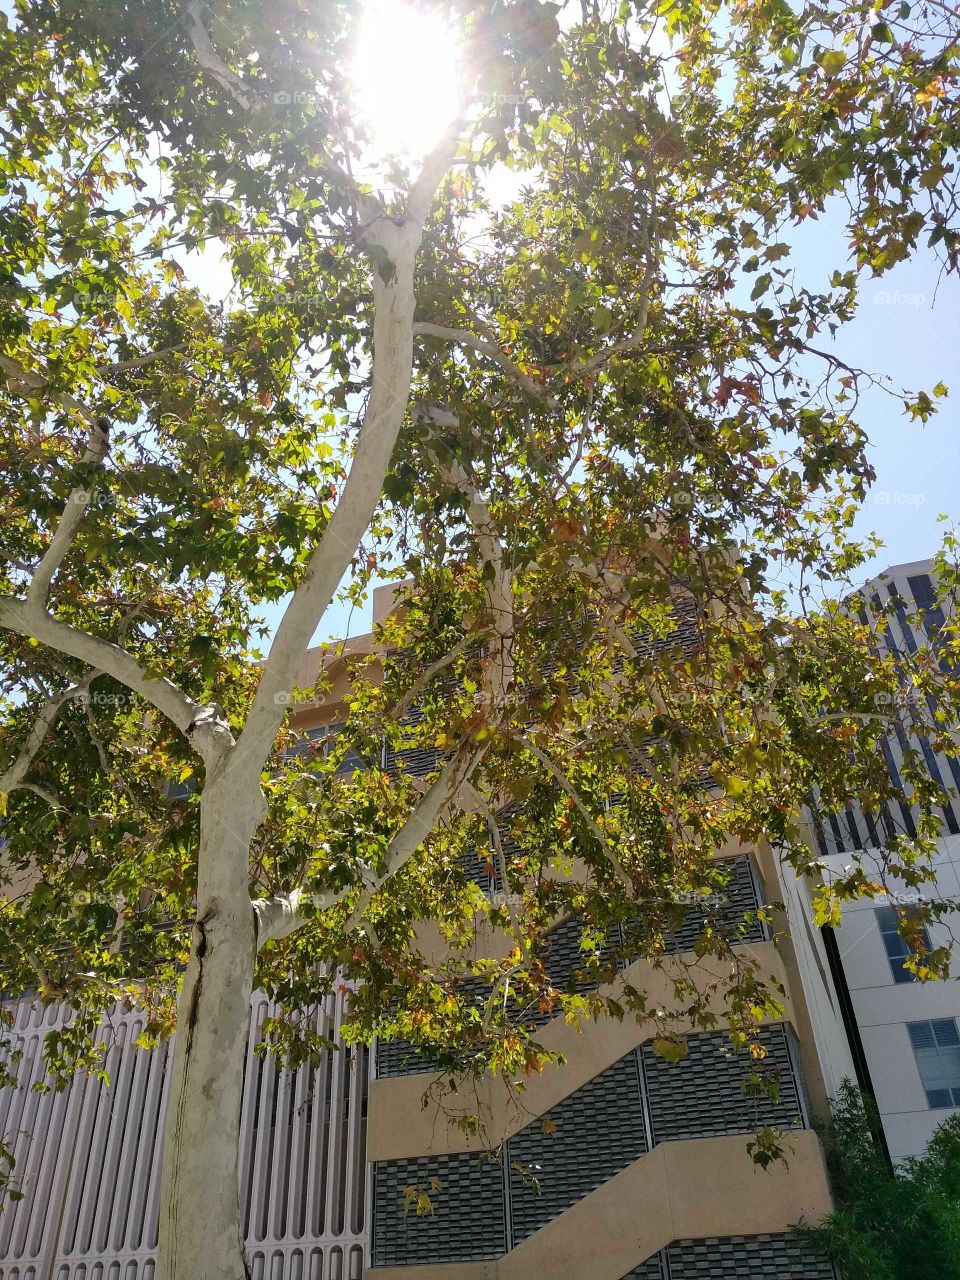 Sun Through Leaves In The City